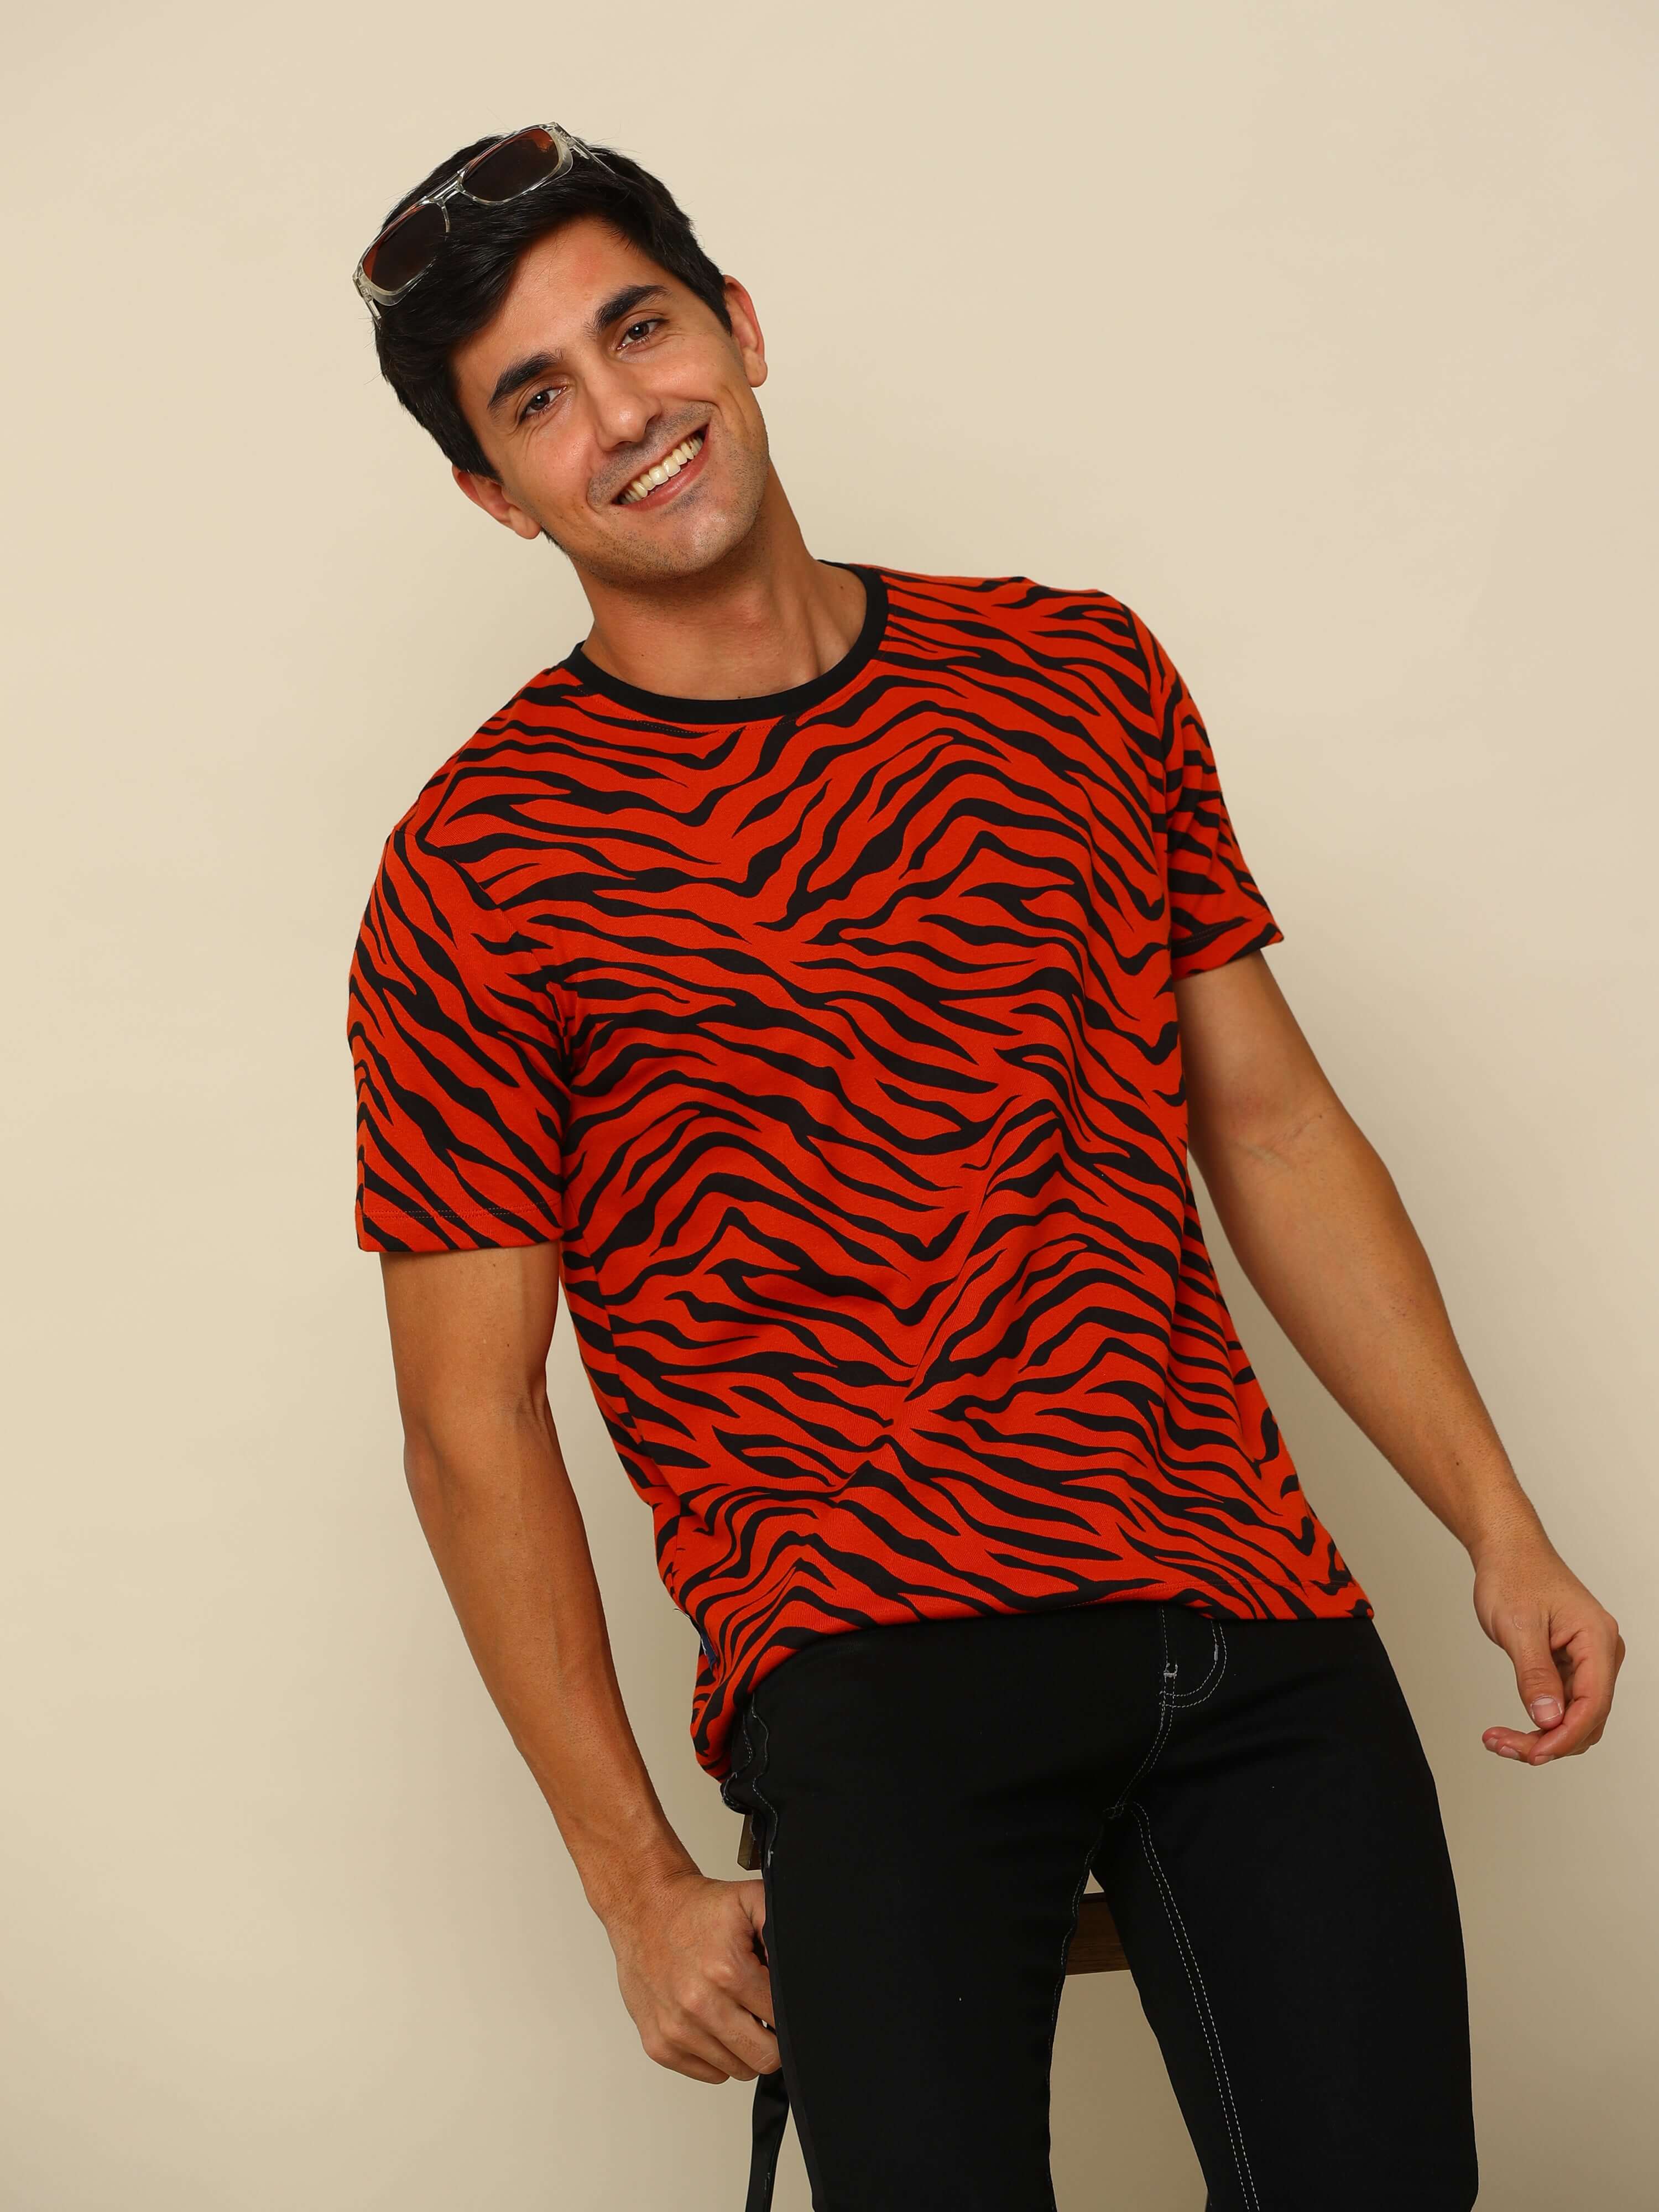 Red Tiger Crew Neck Printed T Shirt shop online at Estilocus. 100% Cotton Designed and printed on knitted fabric. The fabric is stretchy and lightweight, with a soft skin feel and no wrinkles. Flat collar is smooth on the neck and keeps you comfortable al